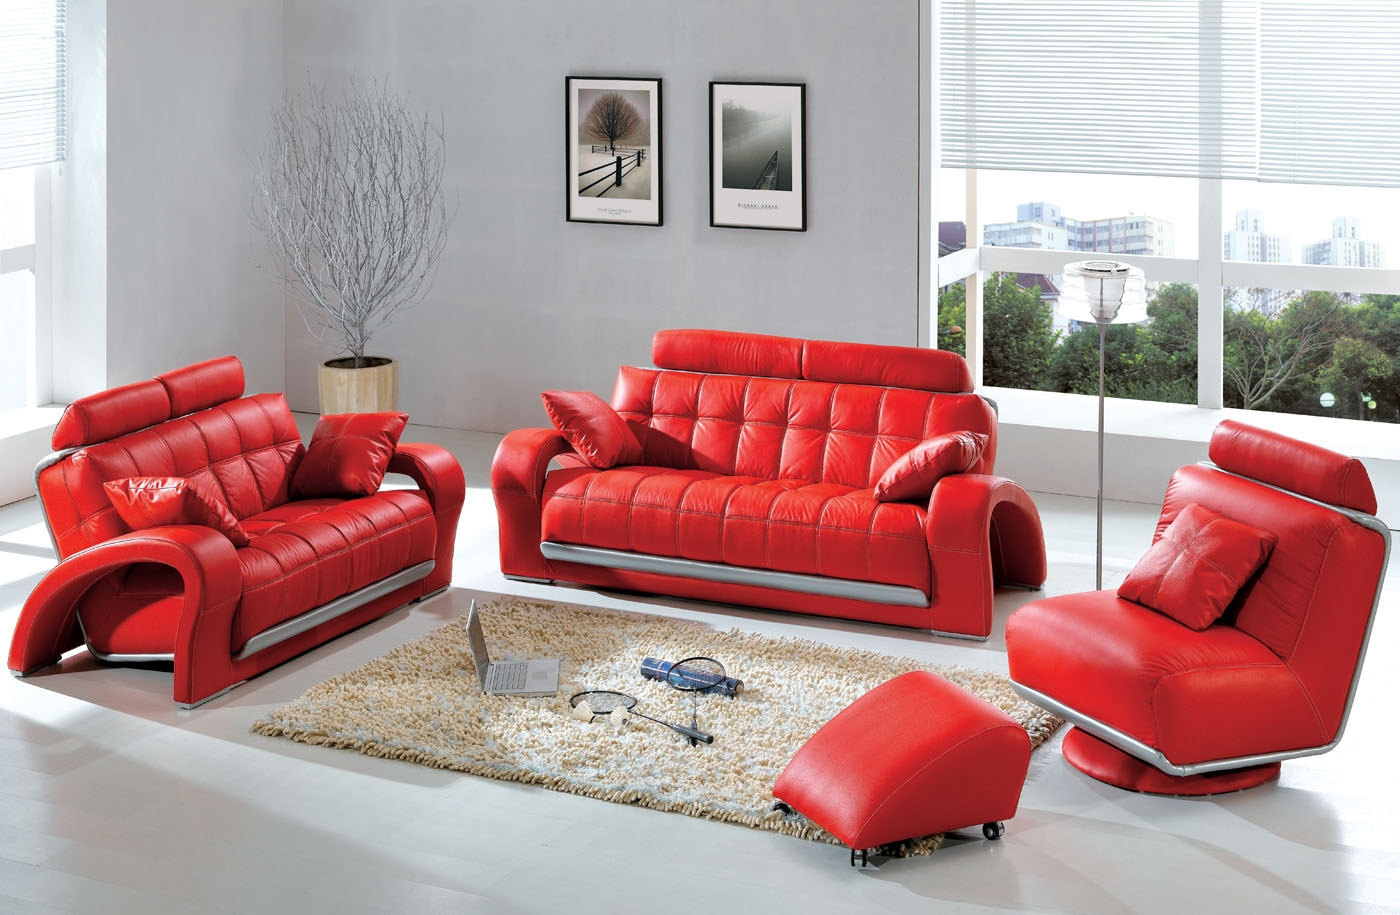 Red Couch Living Room Ideas
 10 Red Couch Living Room Ideas 2019 The Instant Impact